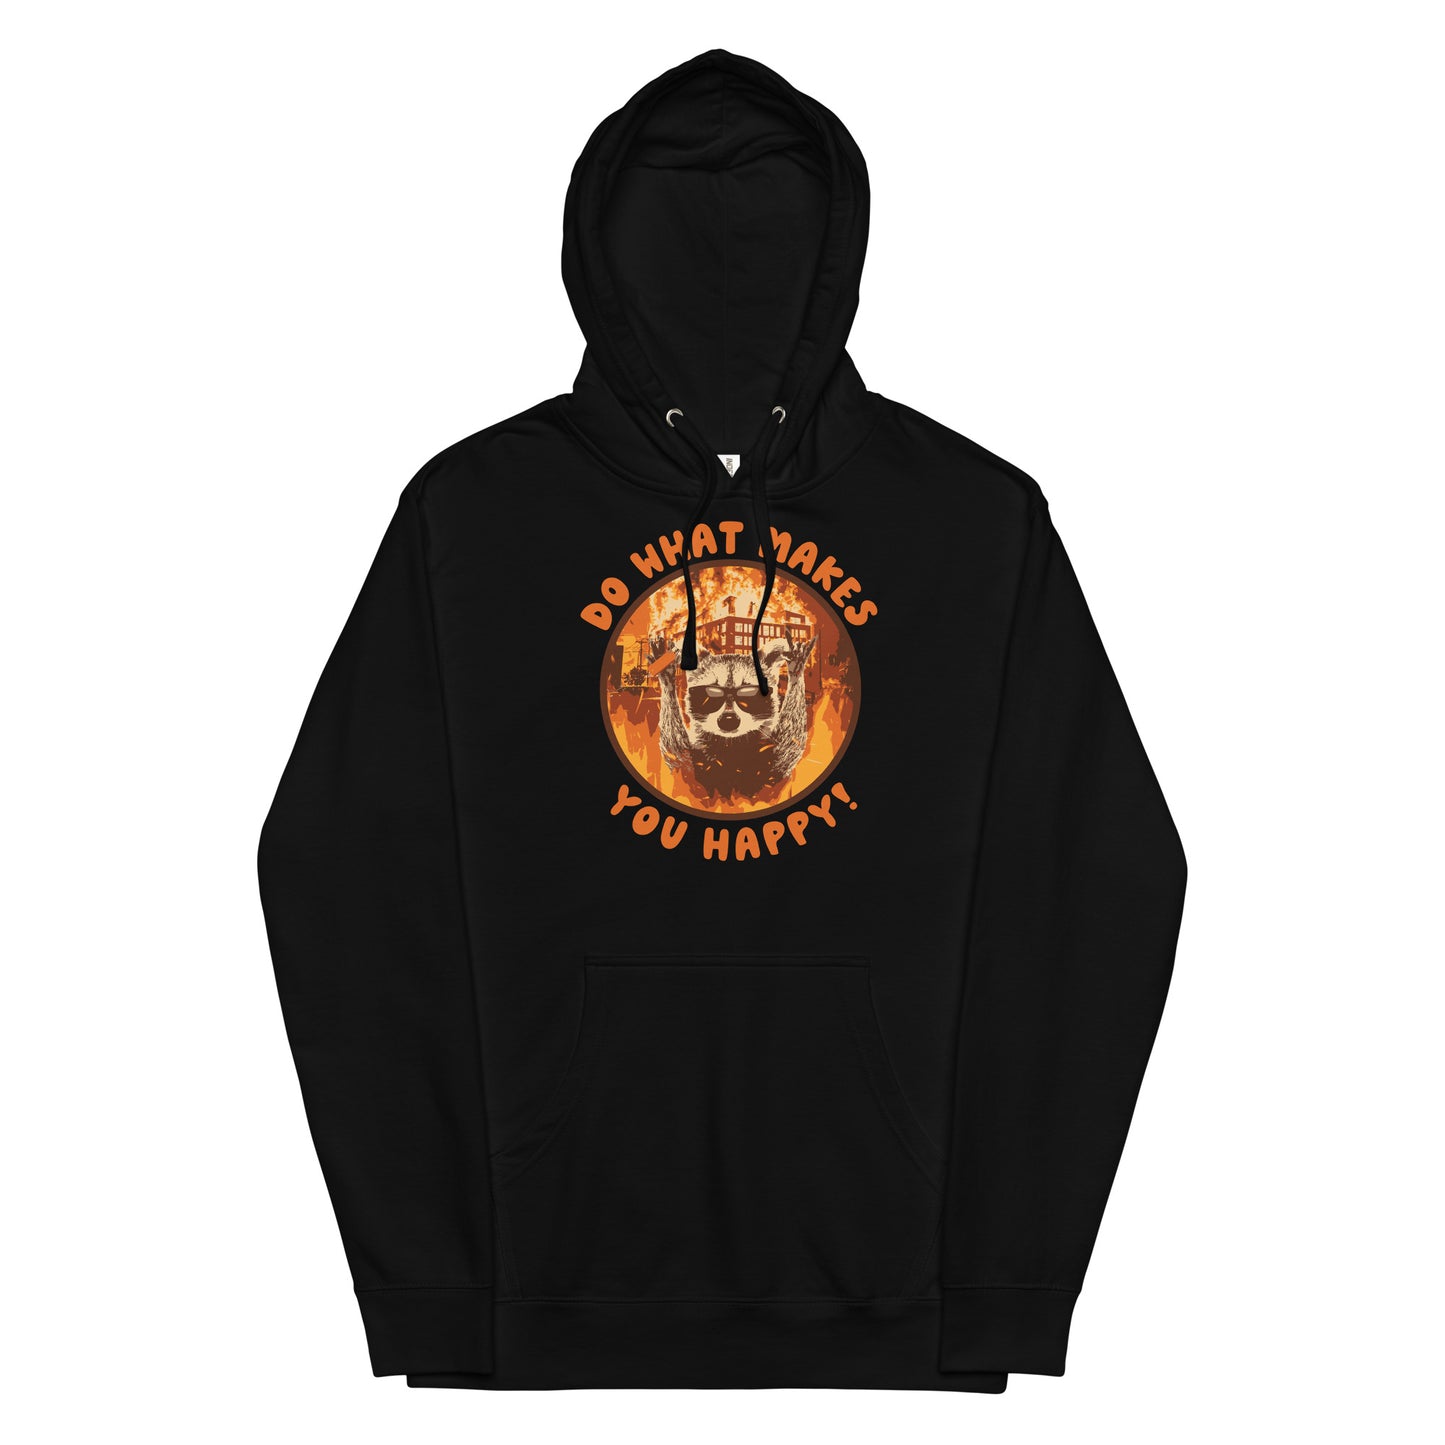 Do What Makes You Happy Unisex hoodie